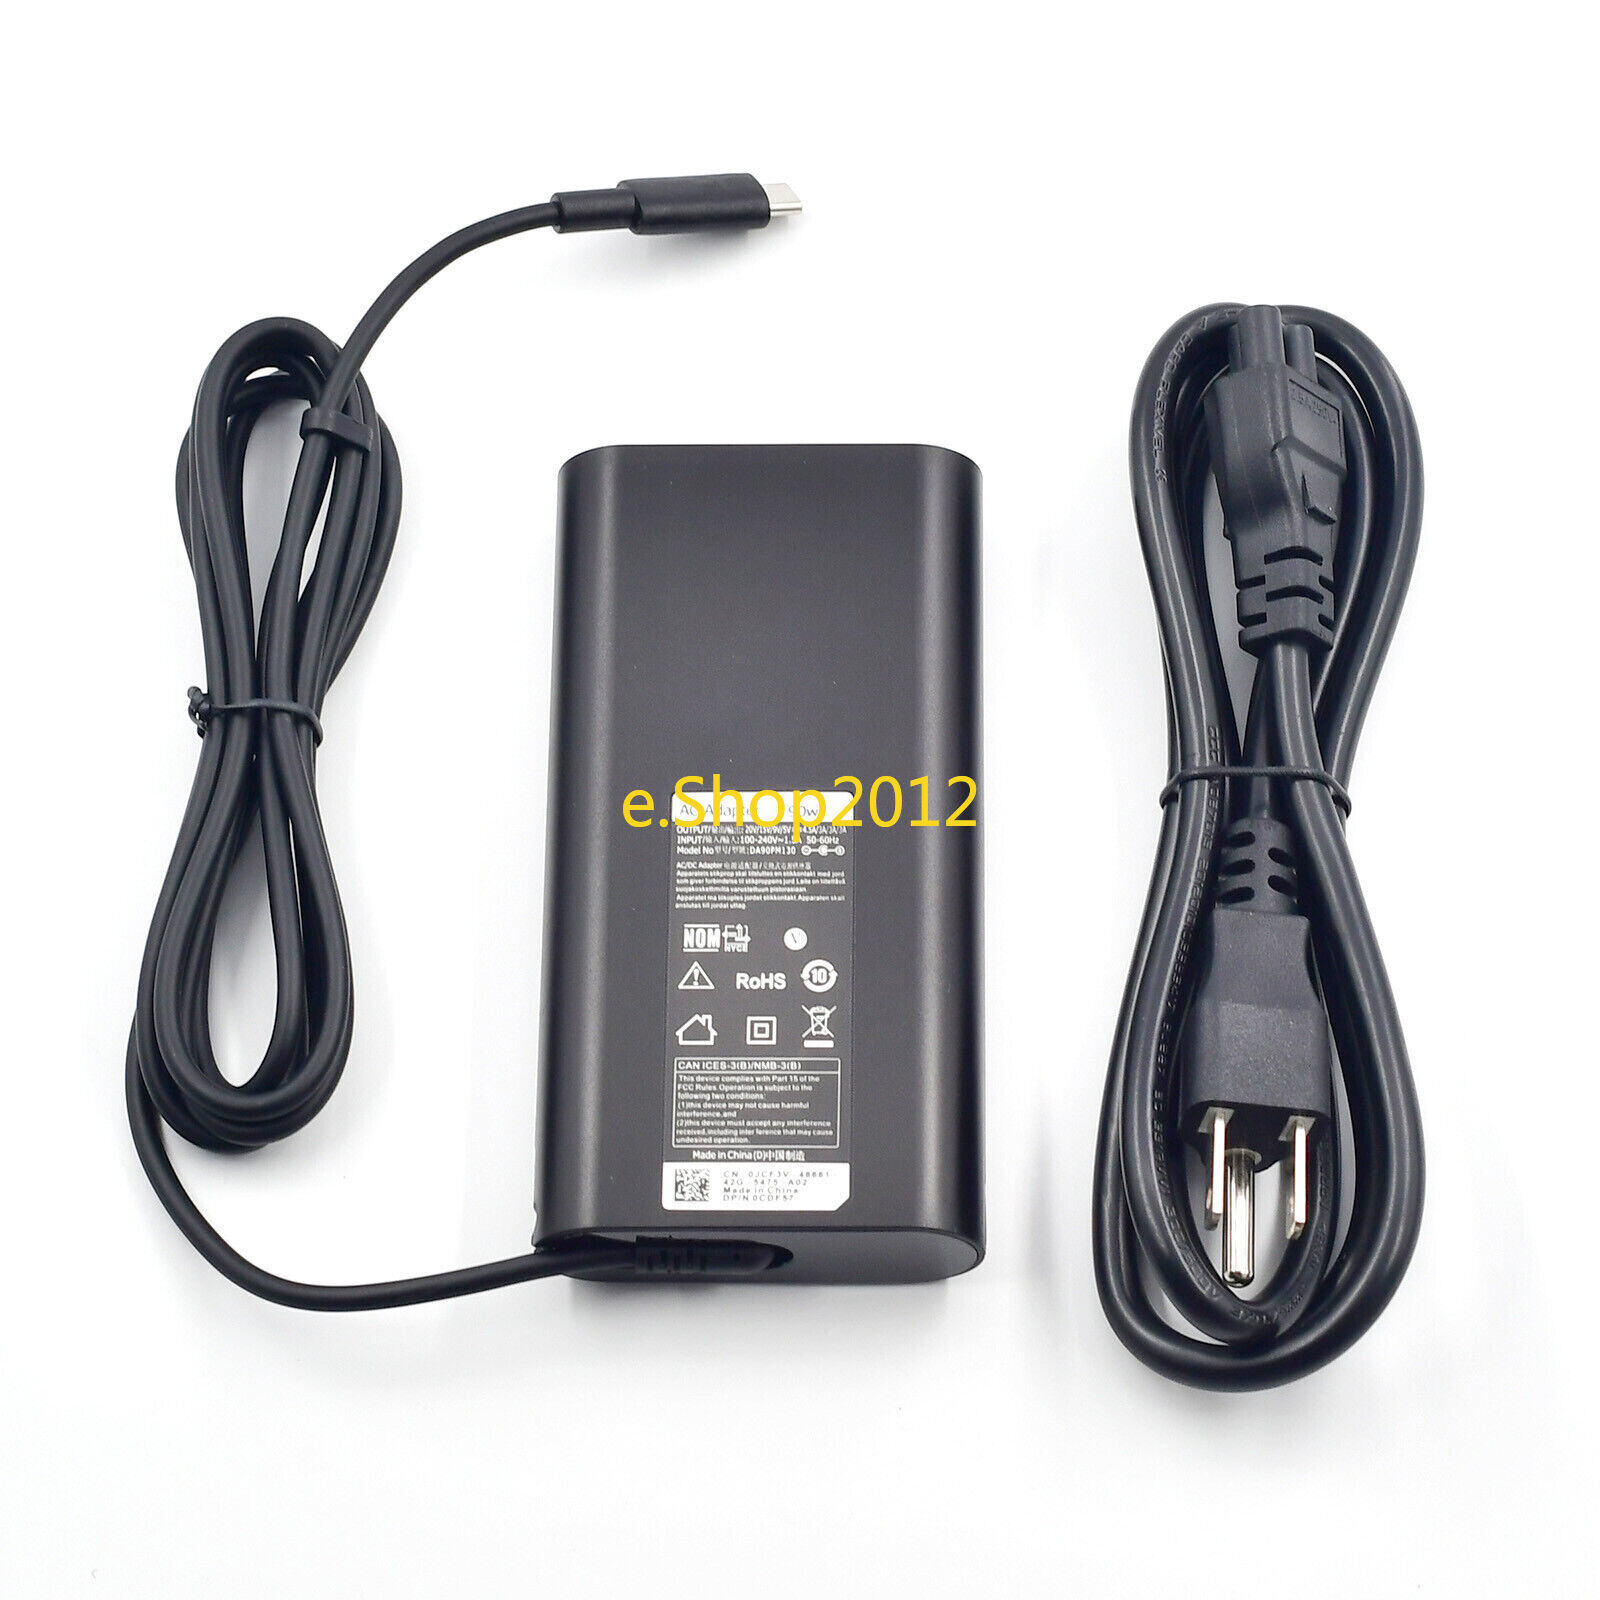 90W USB Type-C Power Adapter for Dell R2M8K LA90PM170 DA65NM190 Laptop Charger